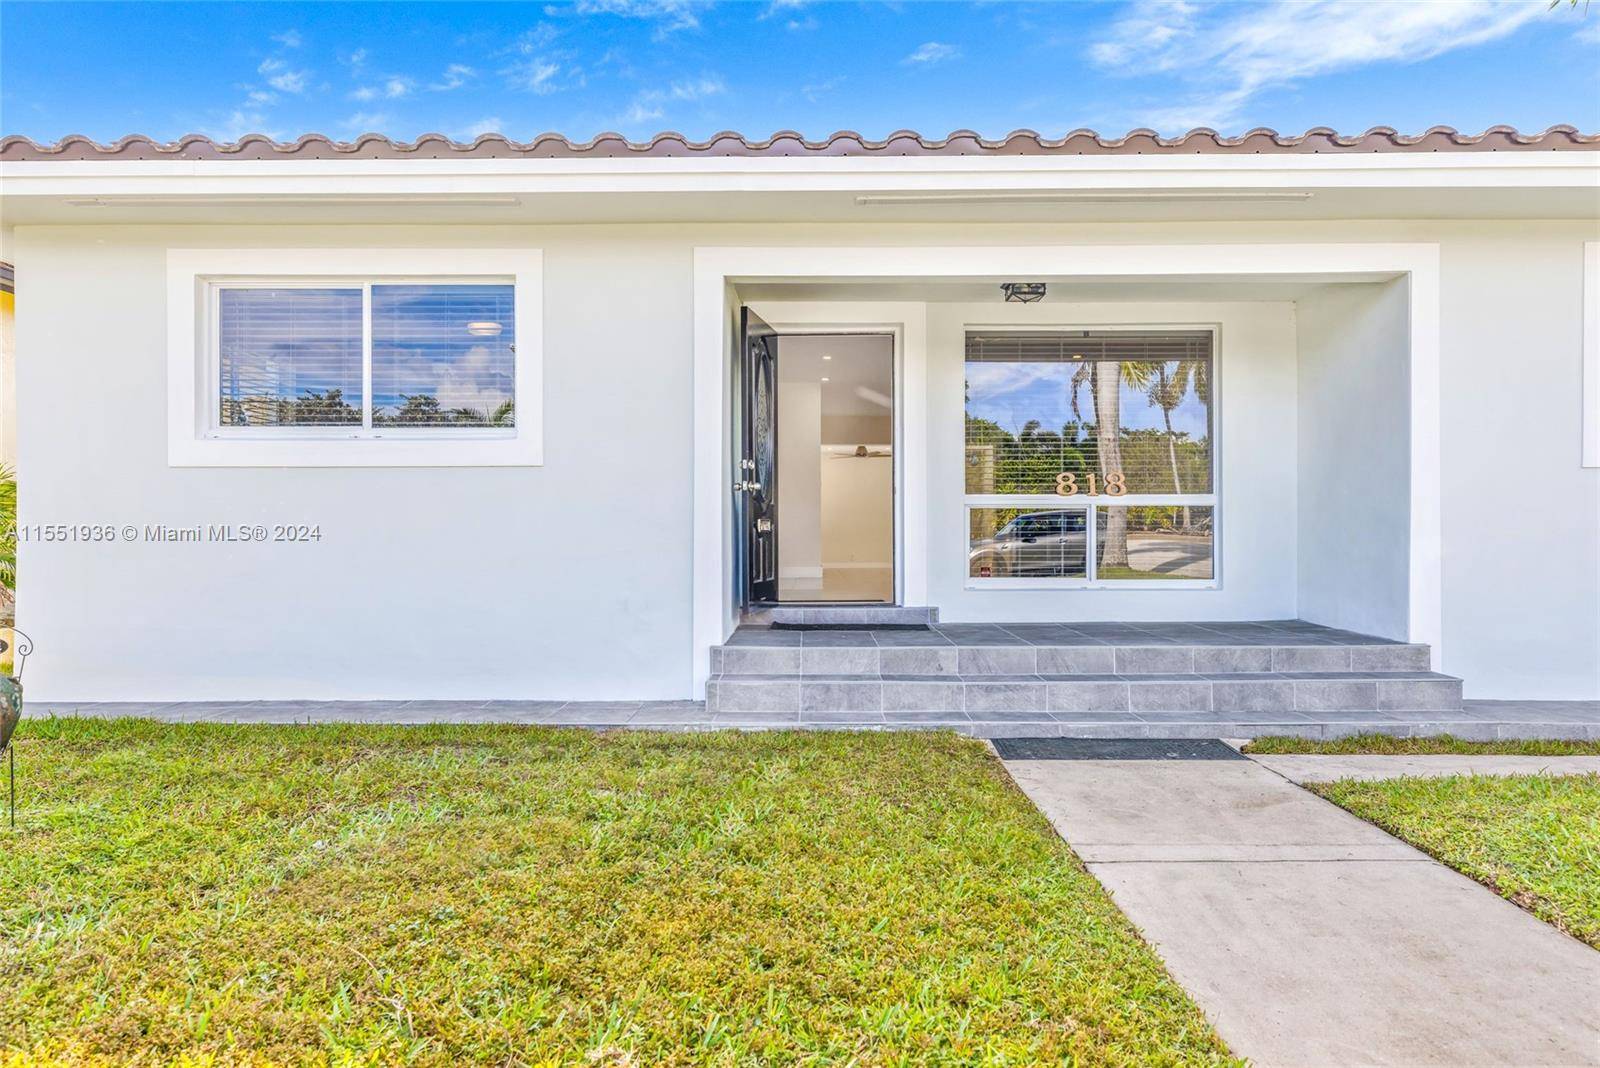 Just a five minute stroll to the beach, this impeccably remodeled 4 bedroom home exudes sophistication at every turn.